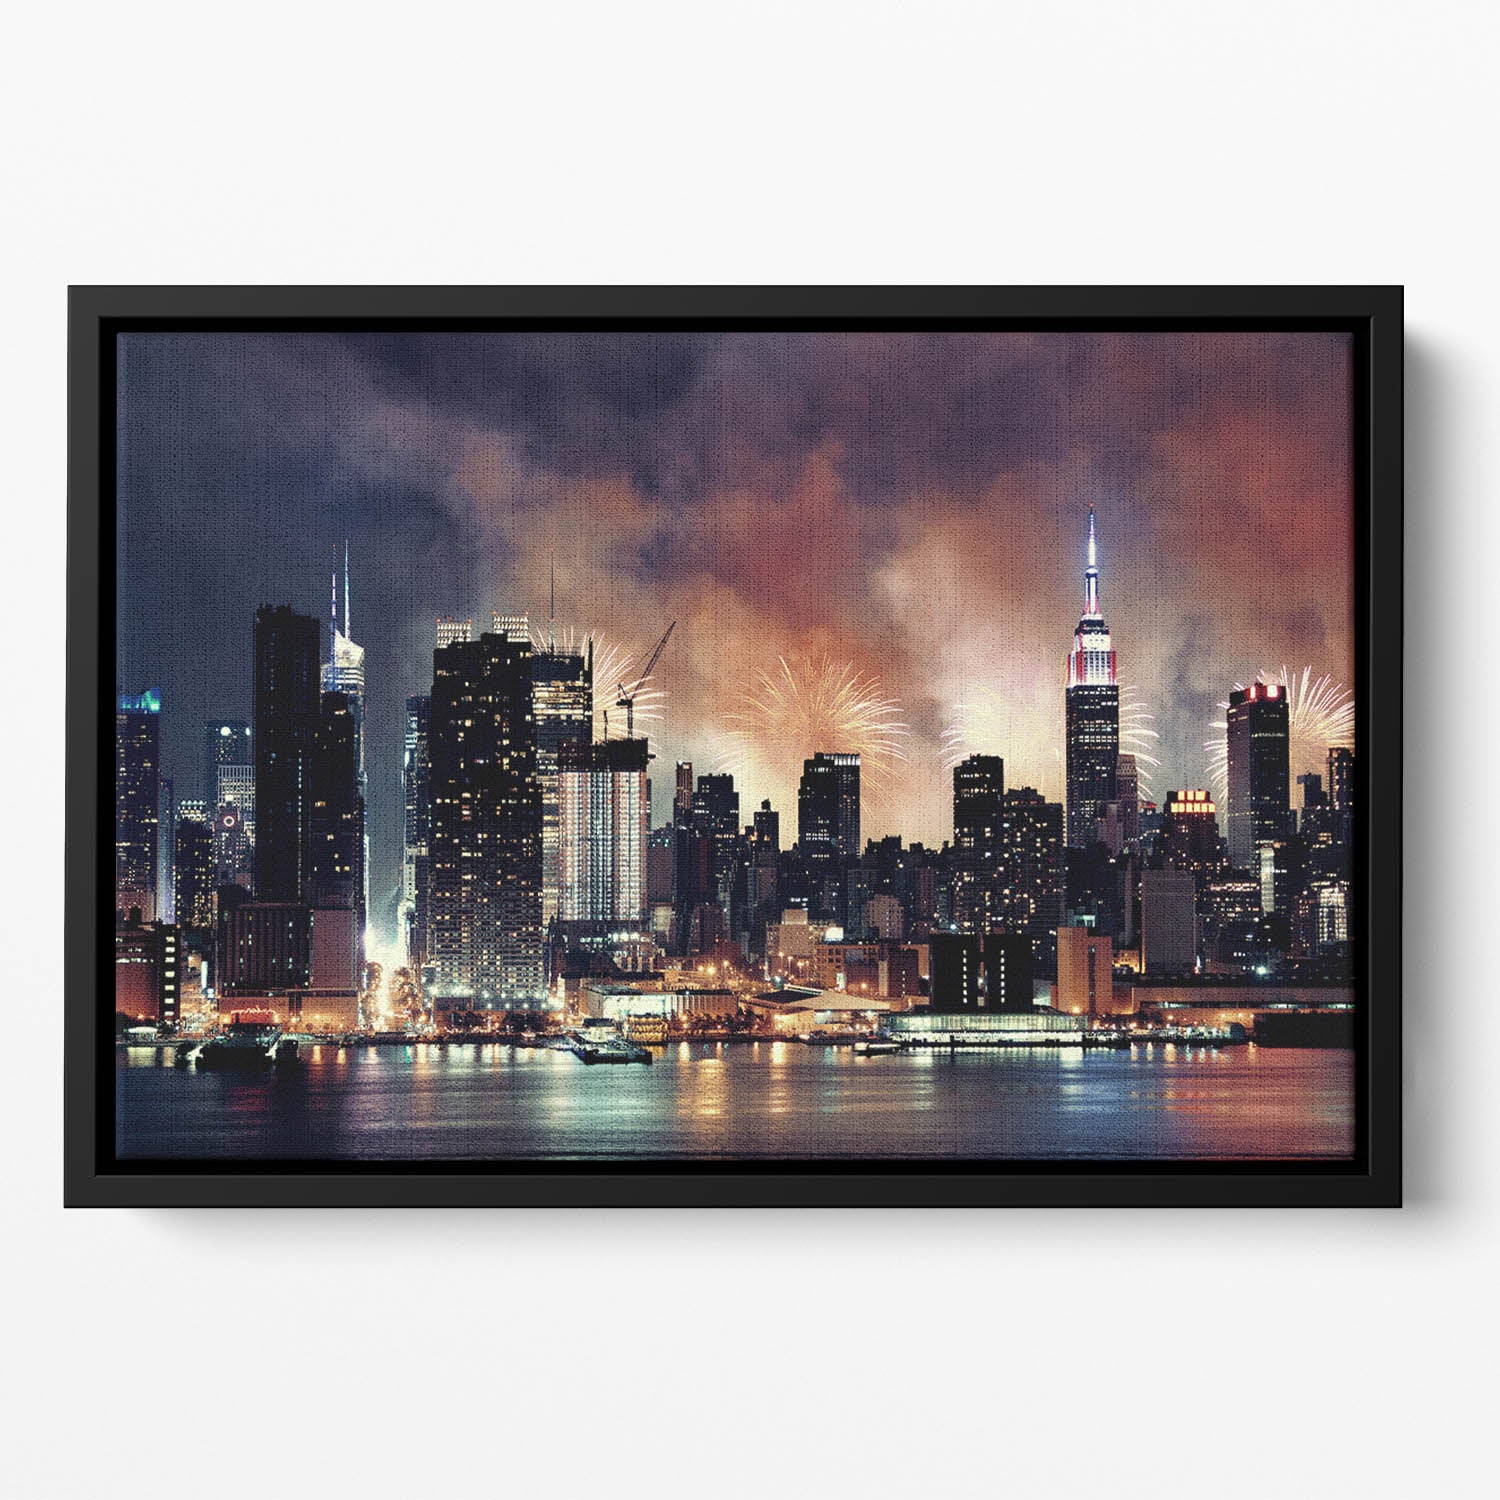 Fireworks show with Manhattan skyscrapers Floating Framed Canvas